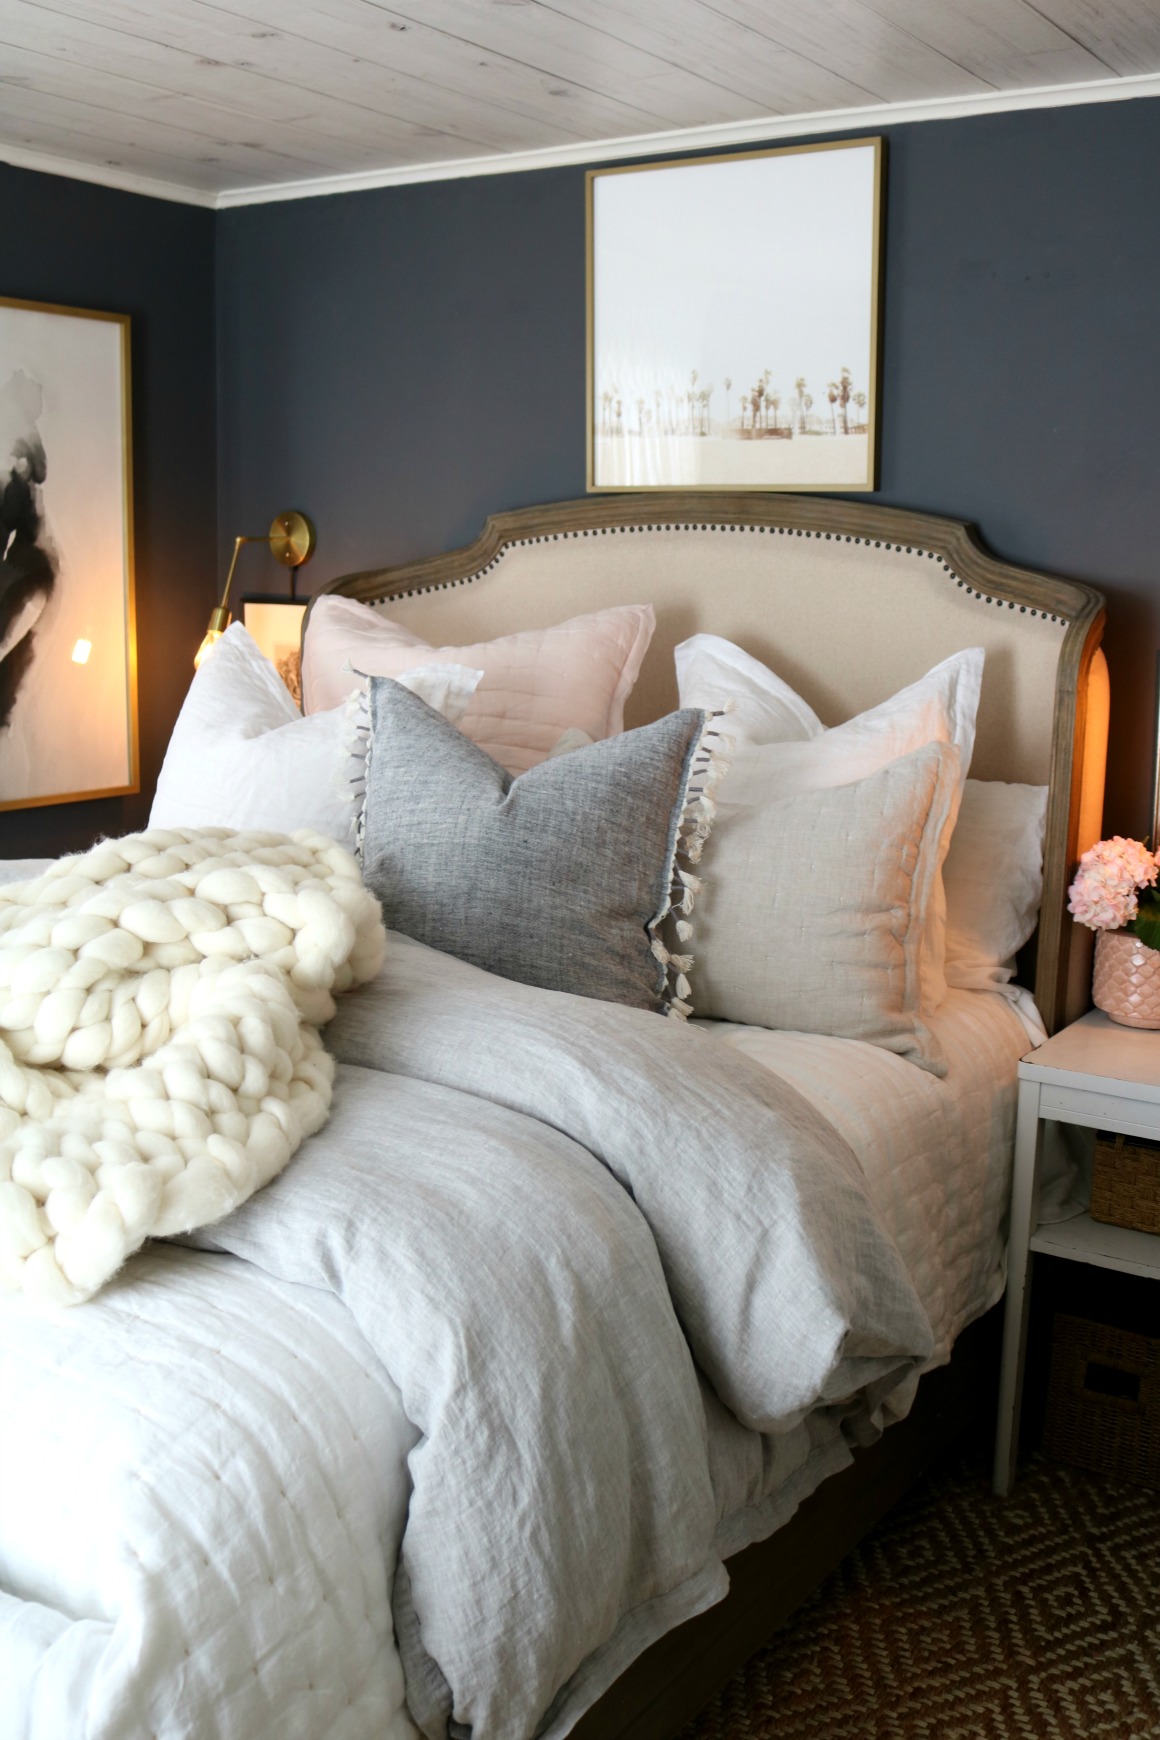 Master Bedroom Bedding- How to Make your Bedding Fluffy!